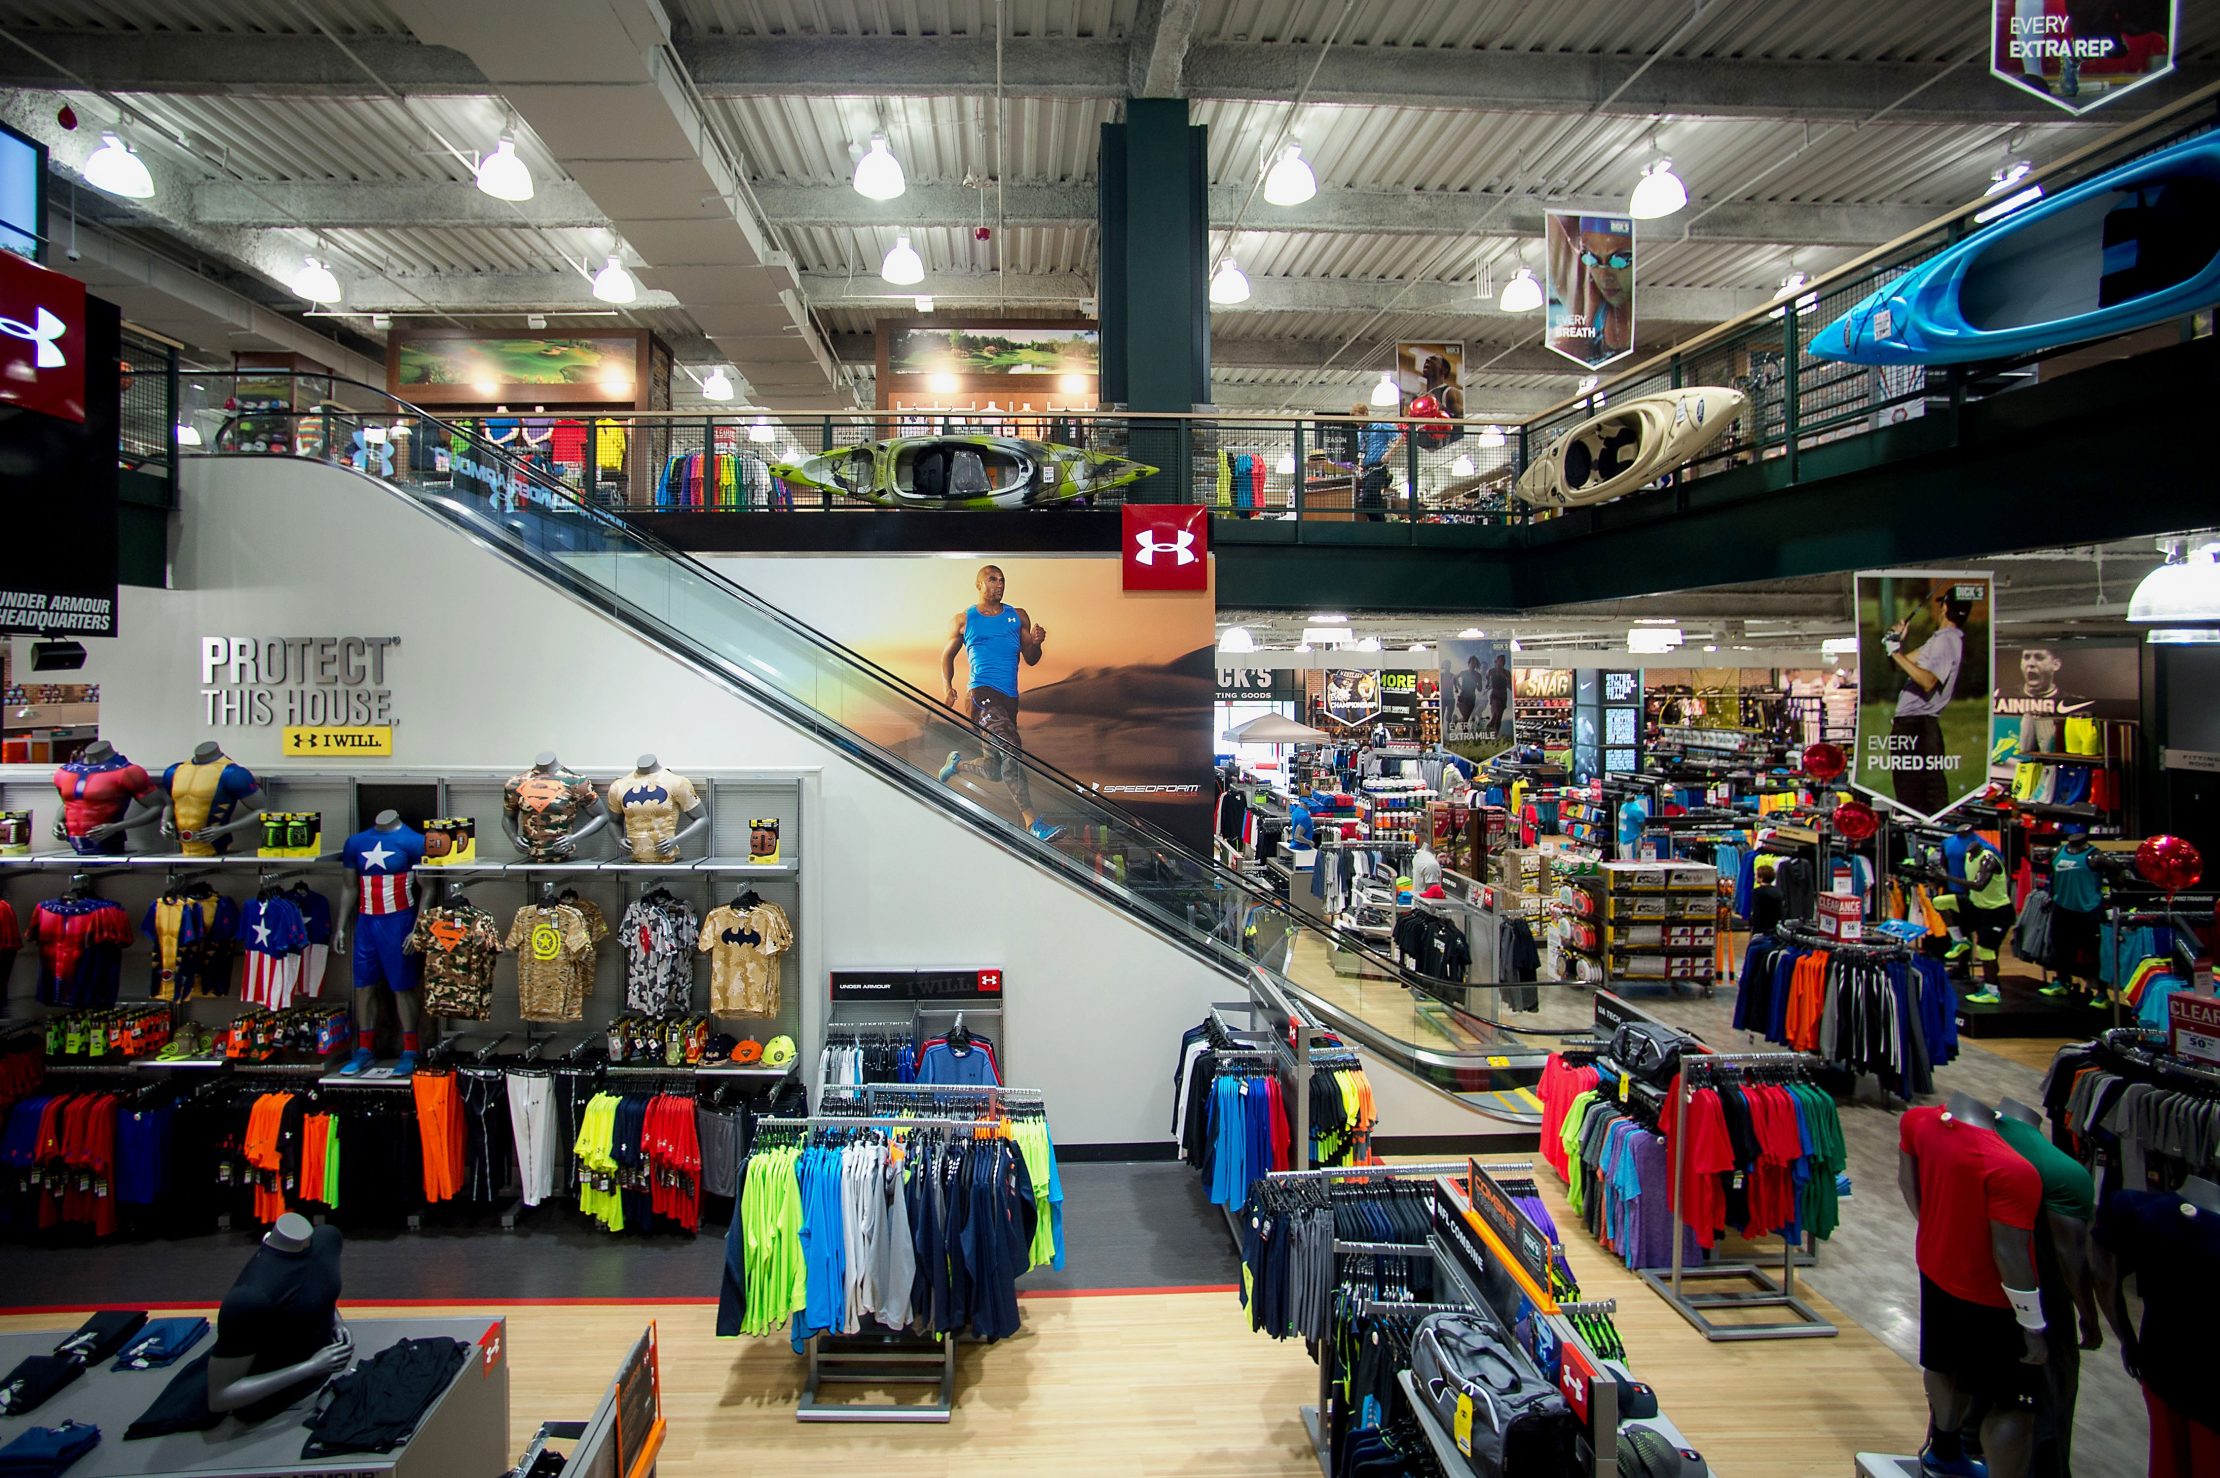 Search for a Sports Store with Promotion Codes